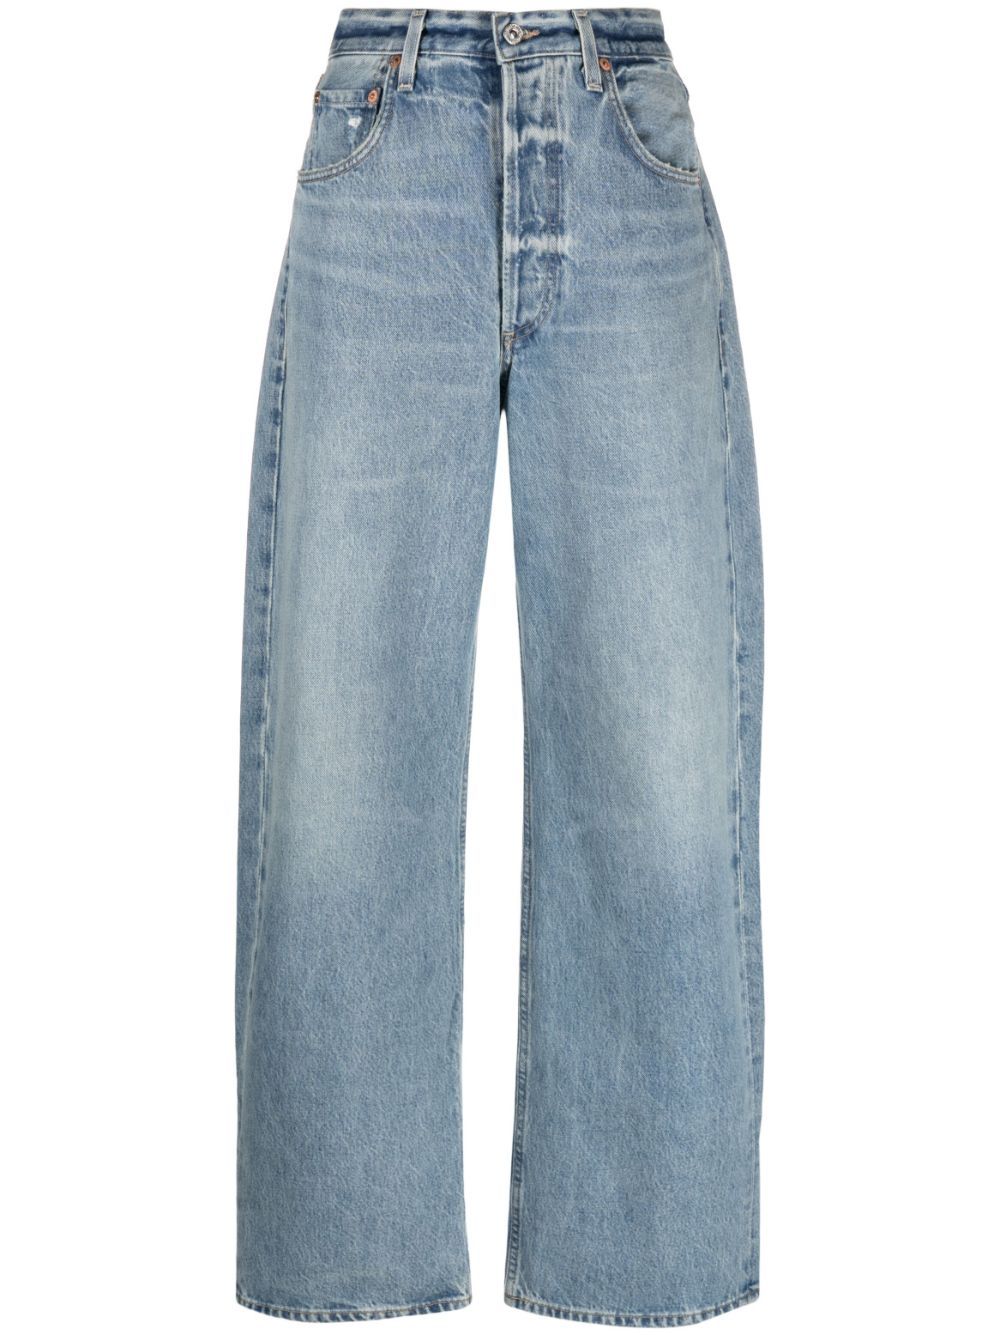 Citizens Of Humanity Ayla Baggy Cropped Jeans - Farfetch | Farfetch Global